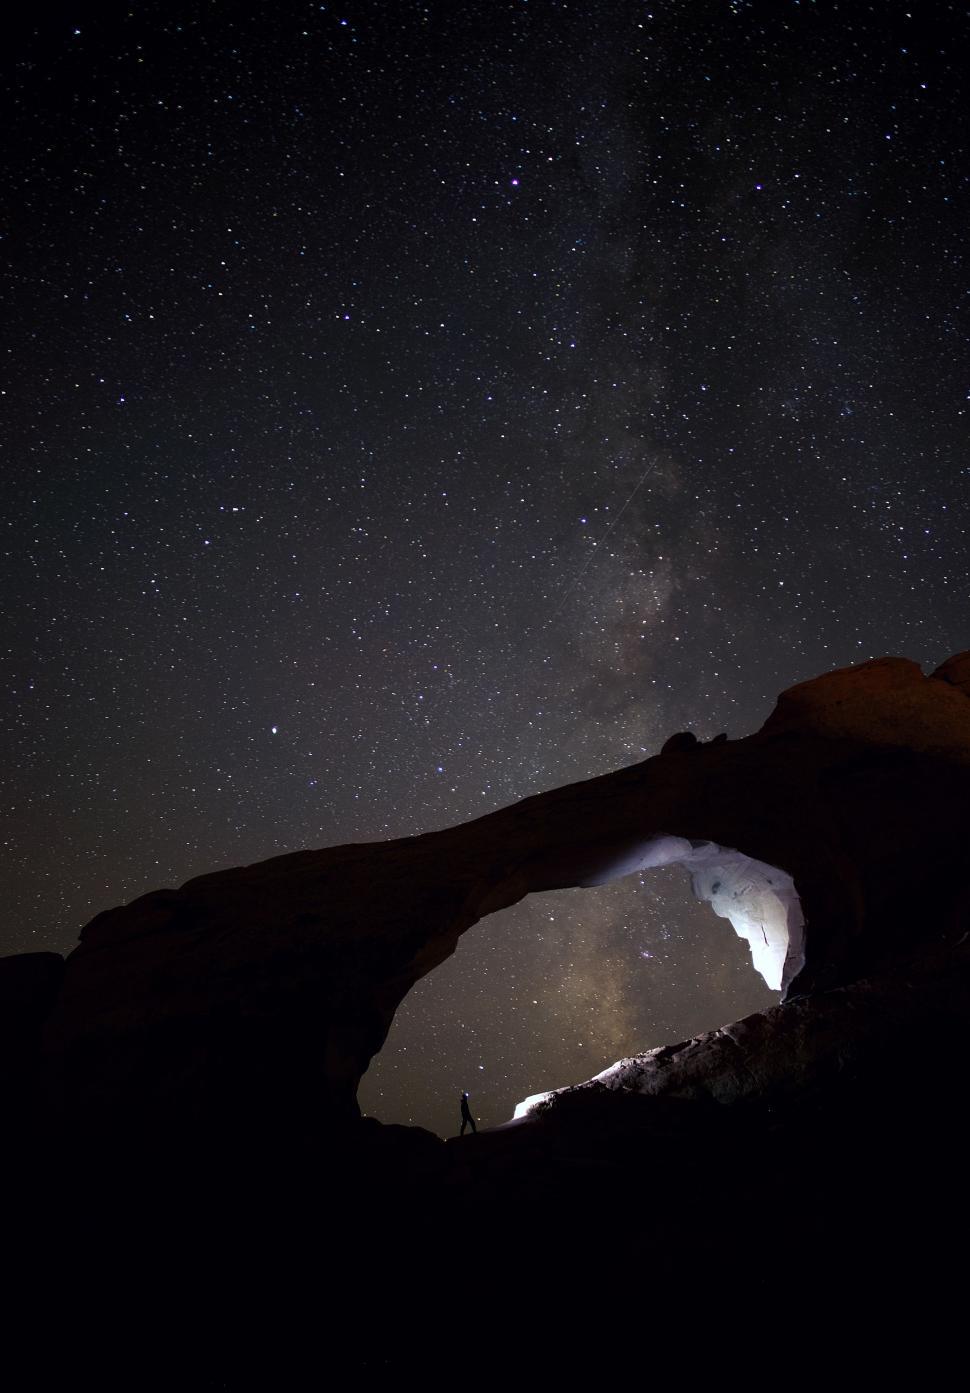 Free Image of Cave in a Mountain Under Starry Night Sky 